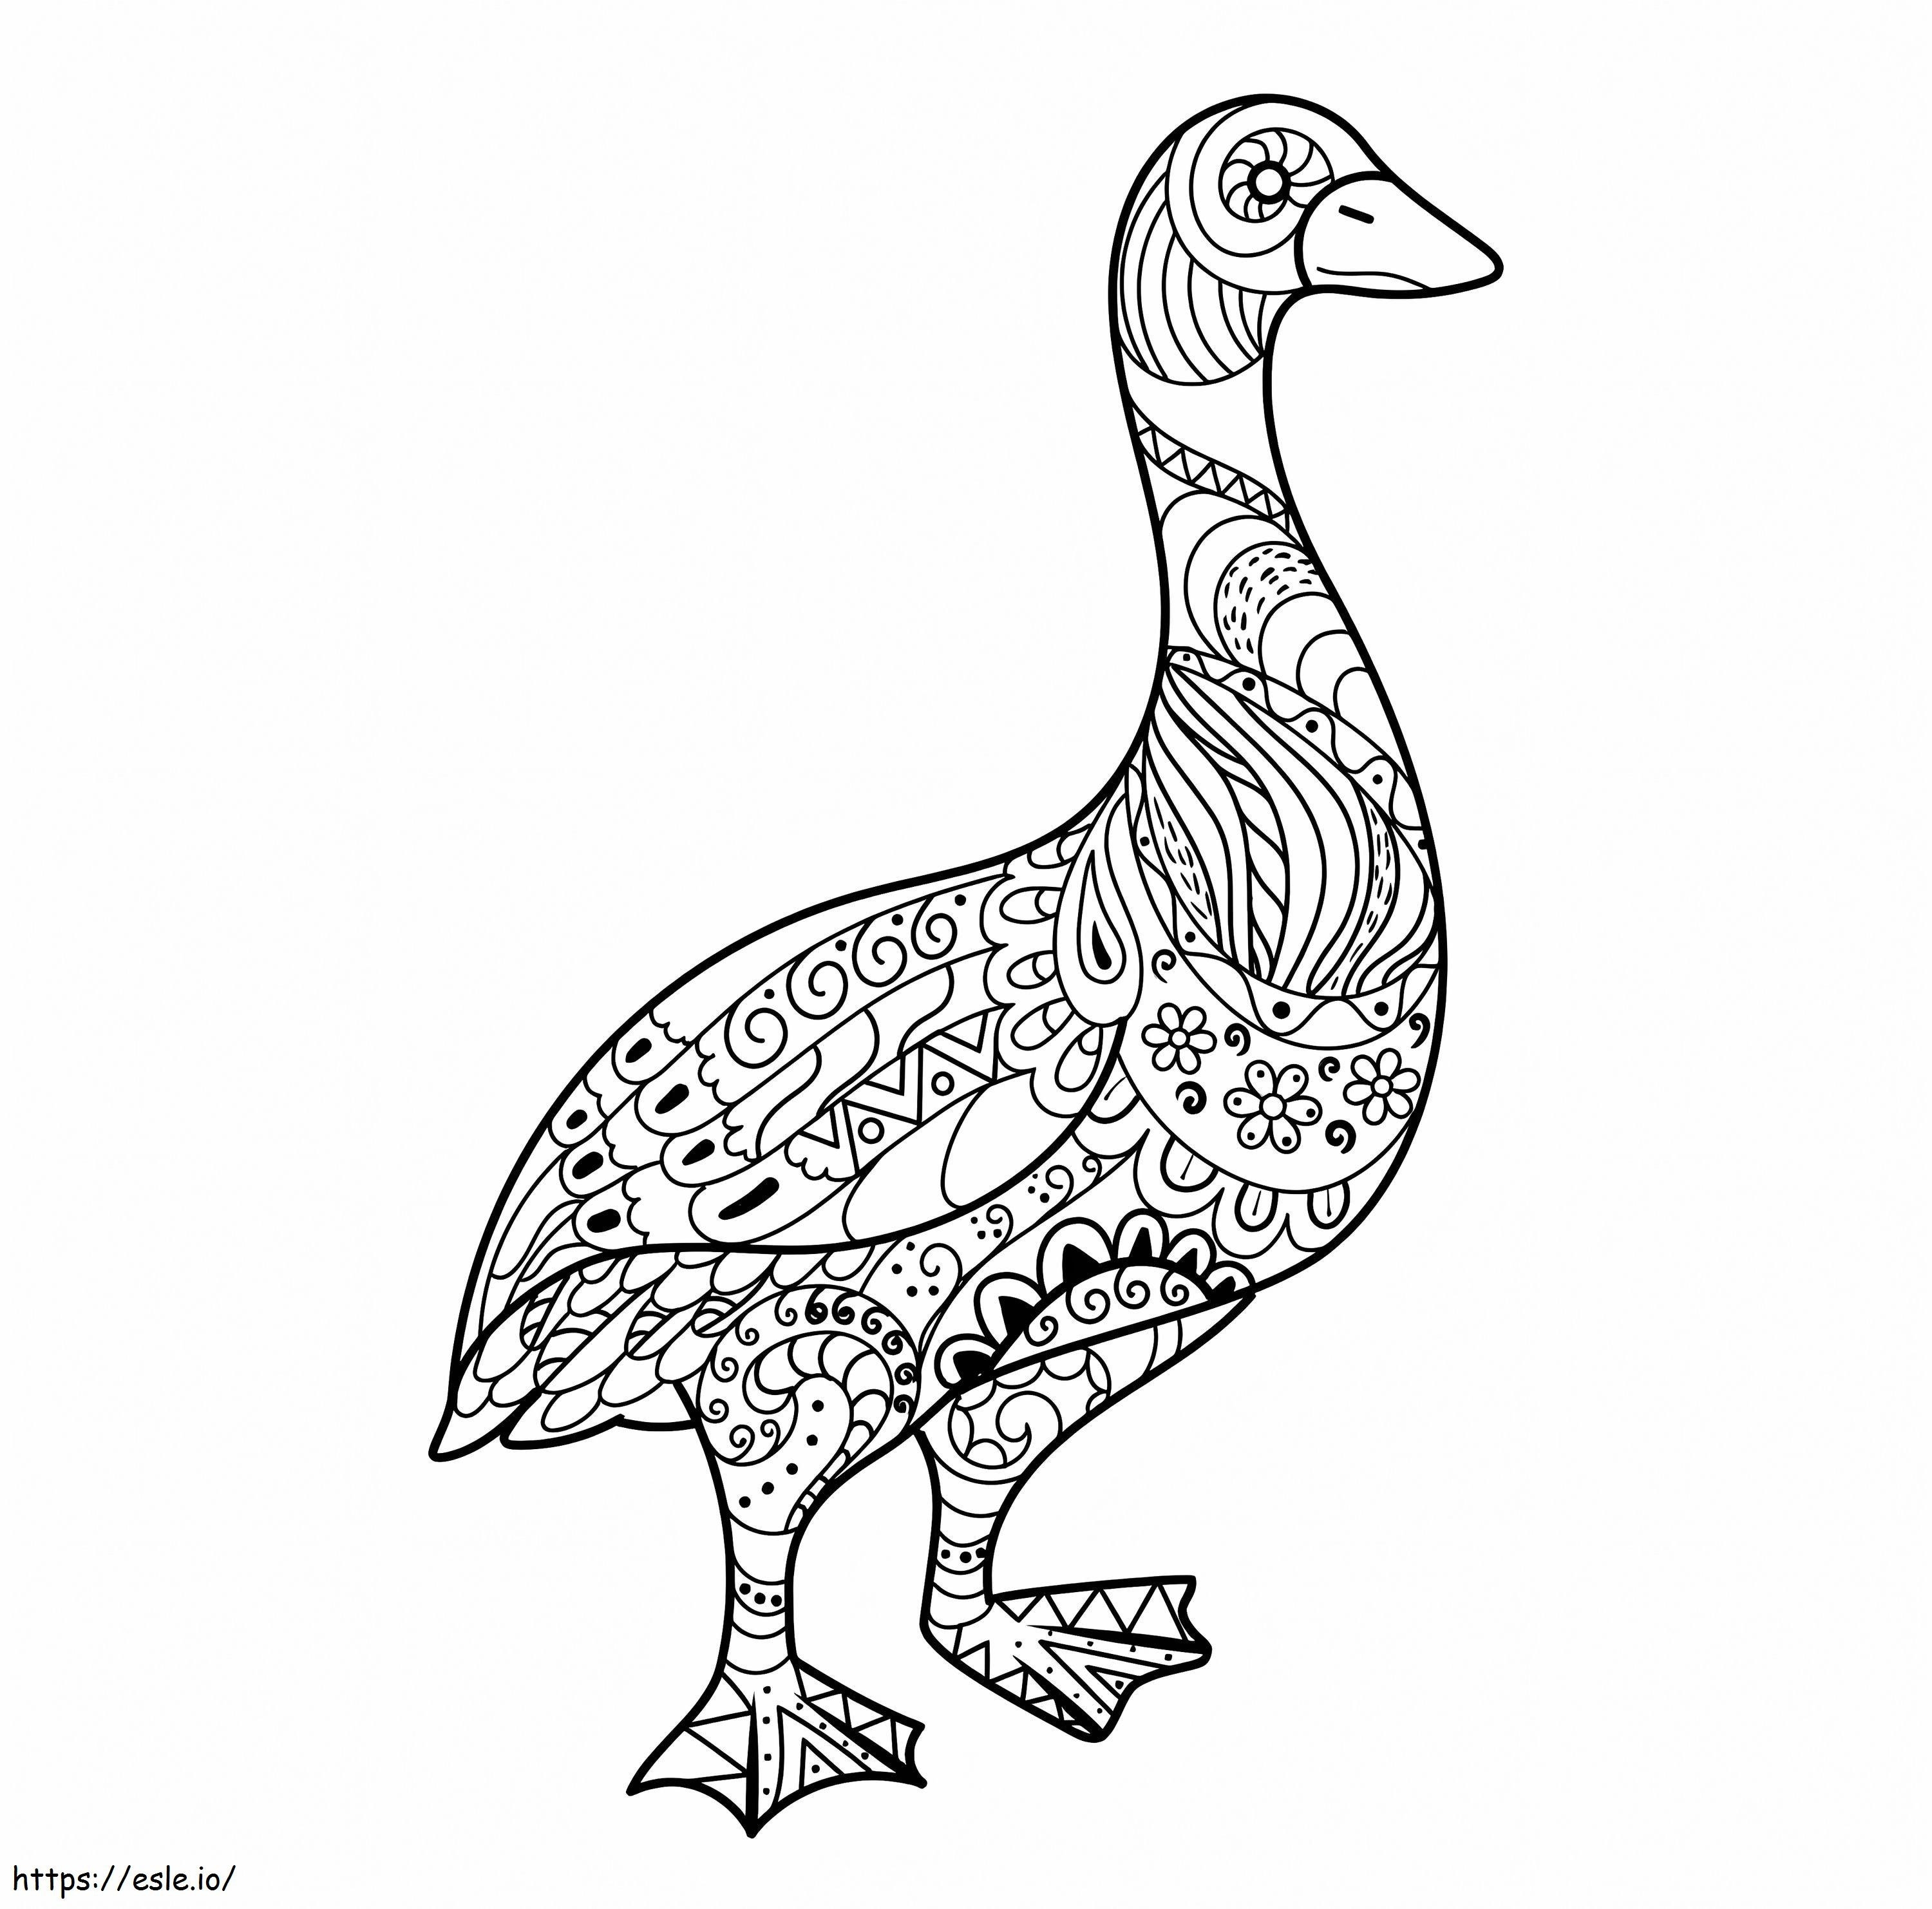 Goose Is For Adults coloring page